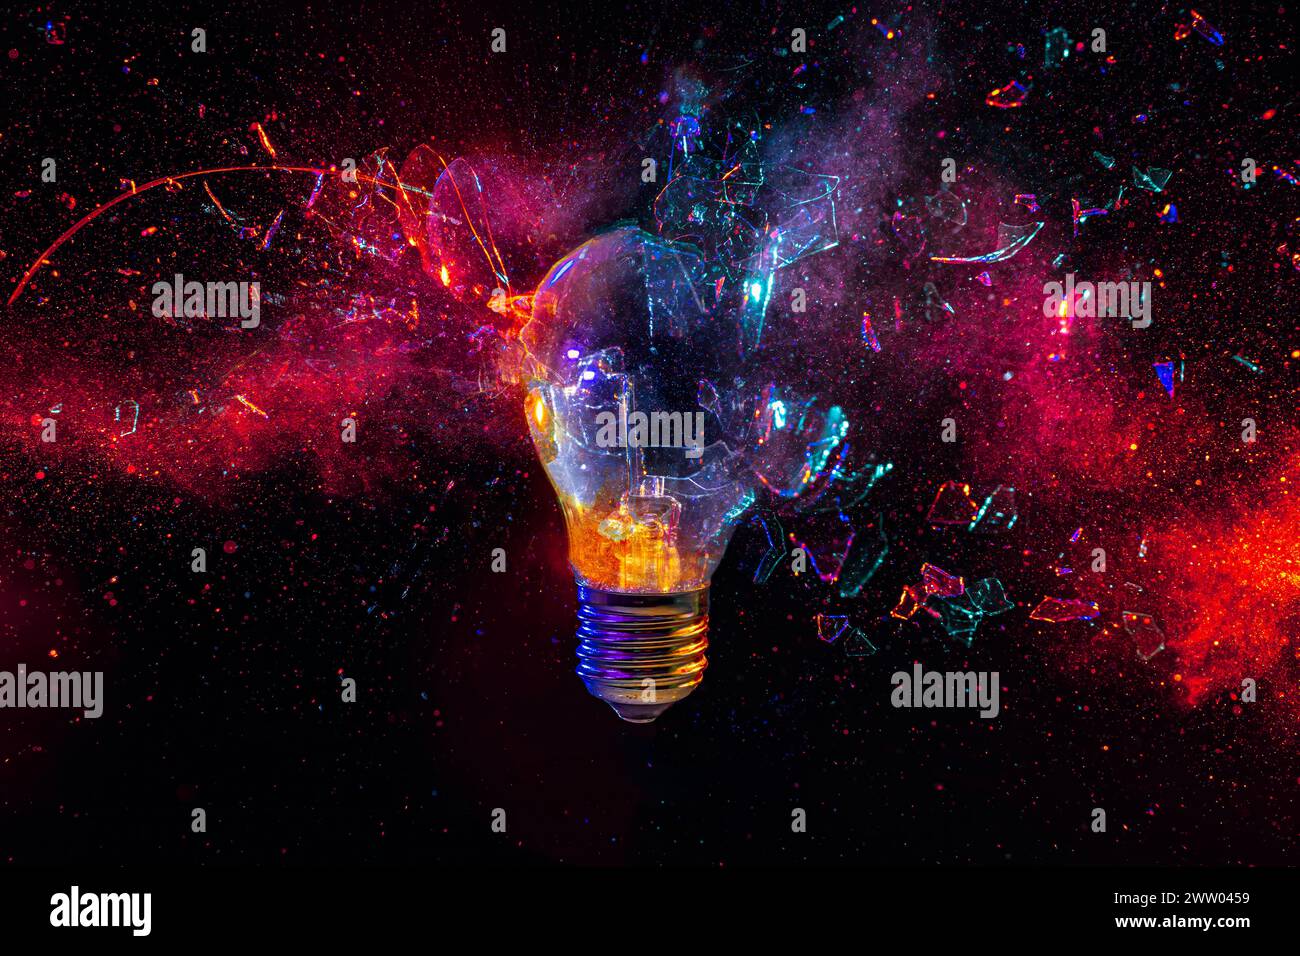 Abstract image of an exploding light bulb with a cosmic background Stock Photo